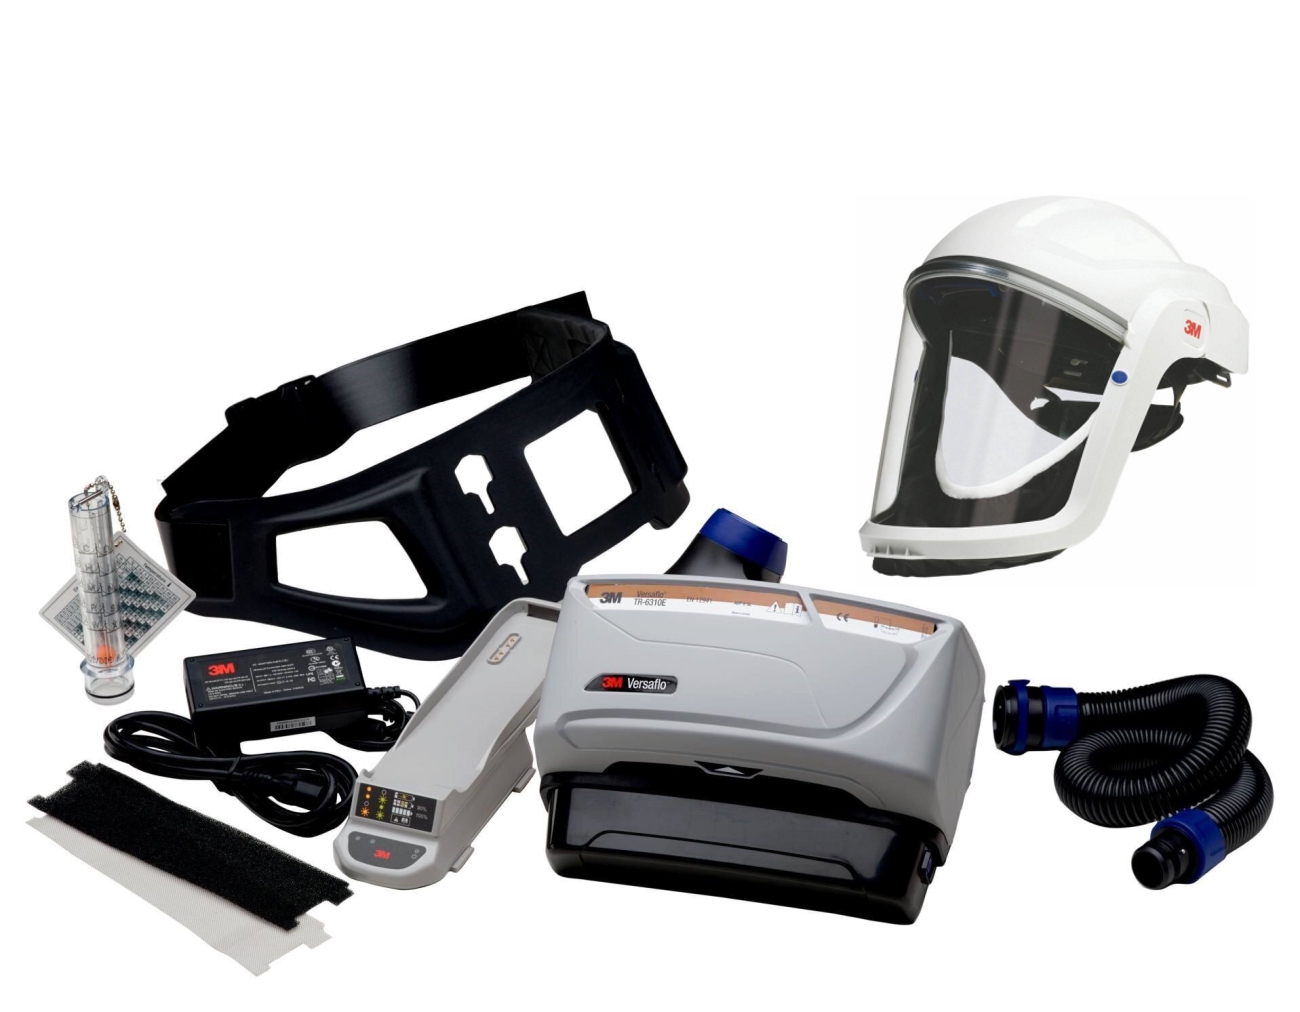 3M TR-619+ Versaflo starter pack incl. TR-602E, accessories and 3M Versaflo Safety helmet M206 with comfort face seal and polycarbonate visor, clear